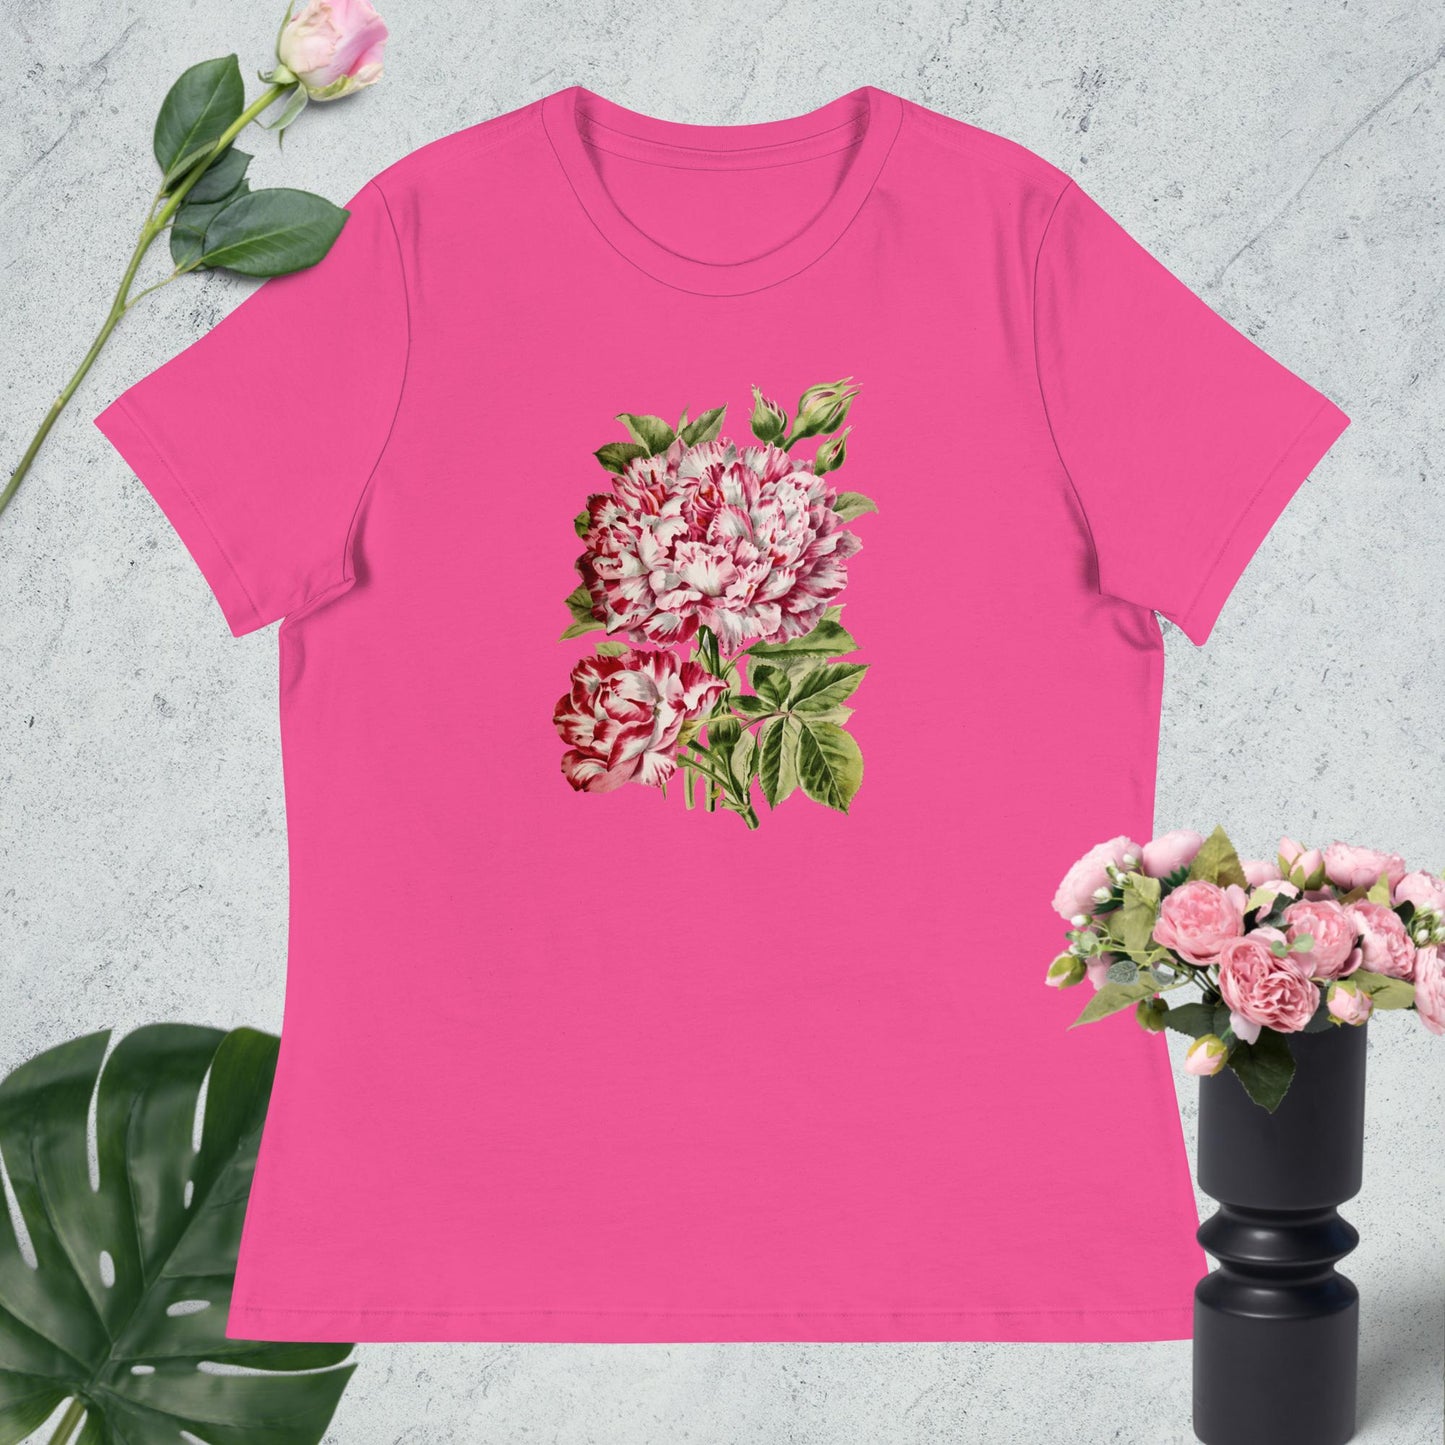 Women's Relaxed T-Shirt pink and white flower